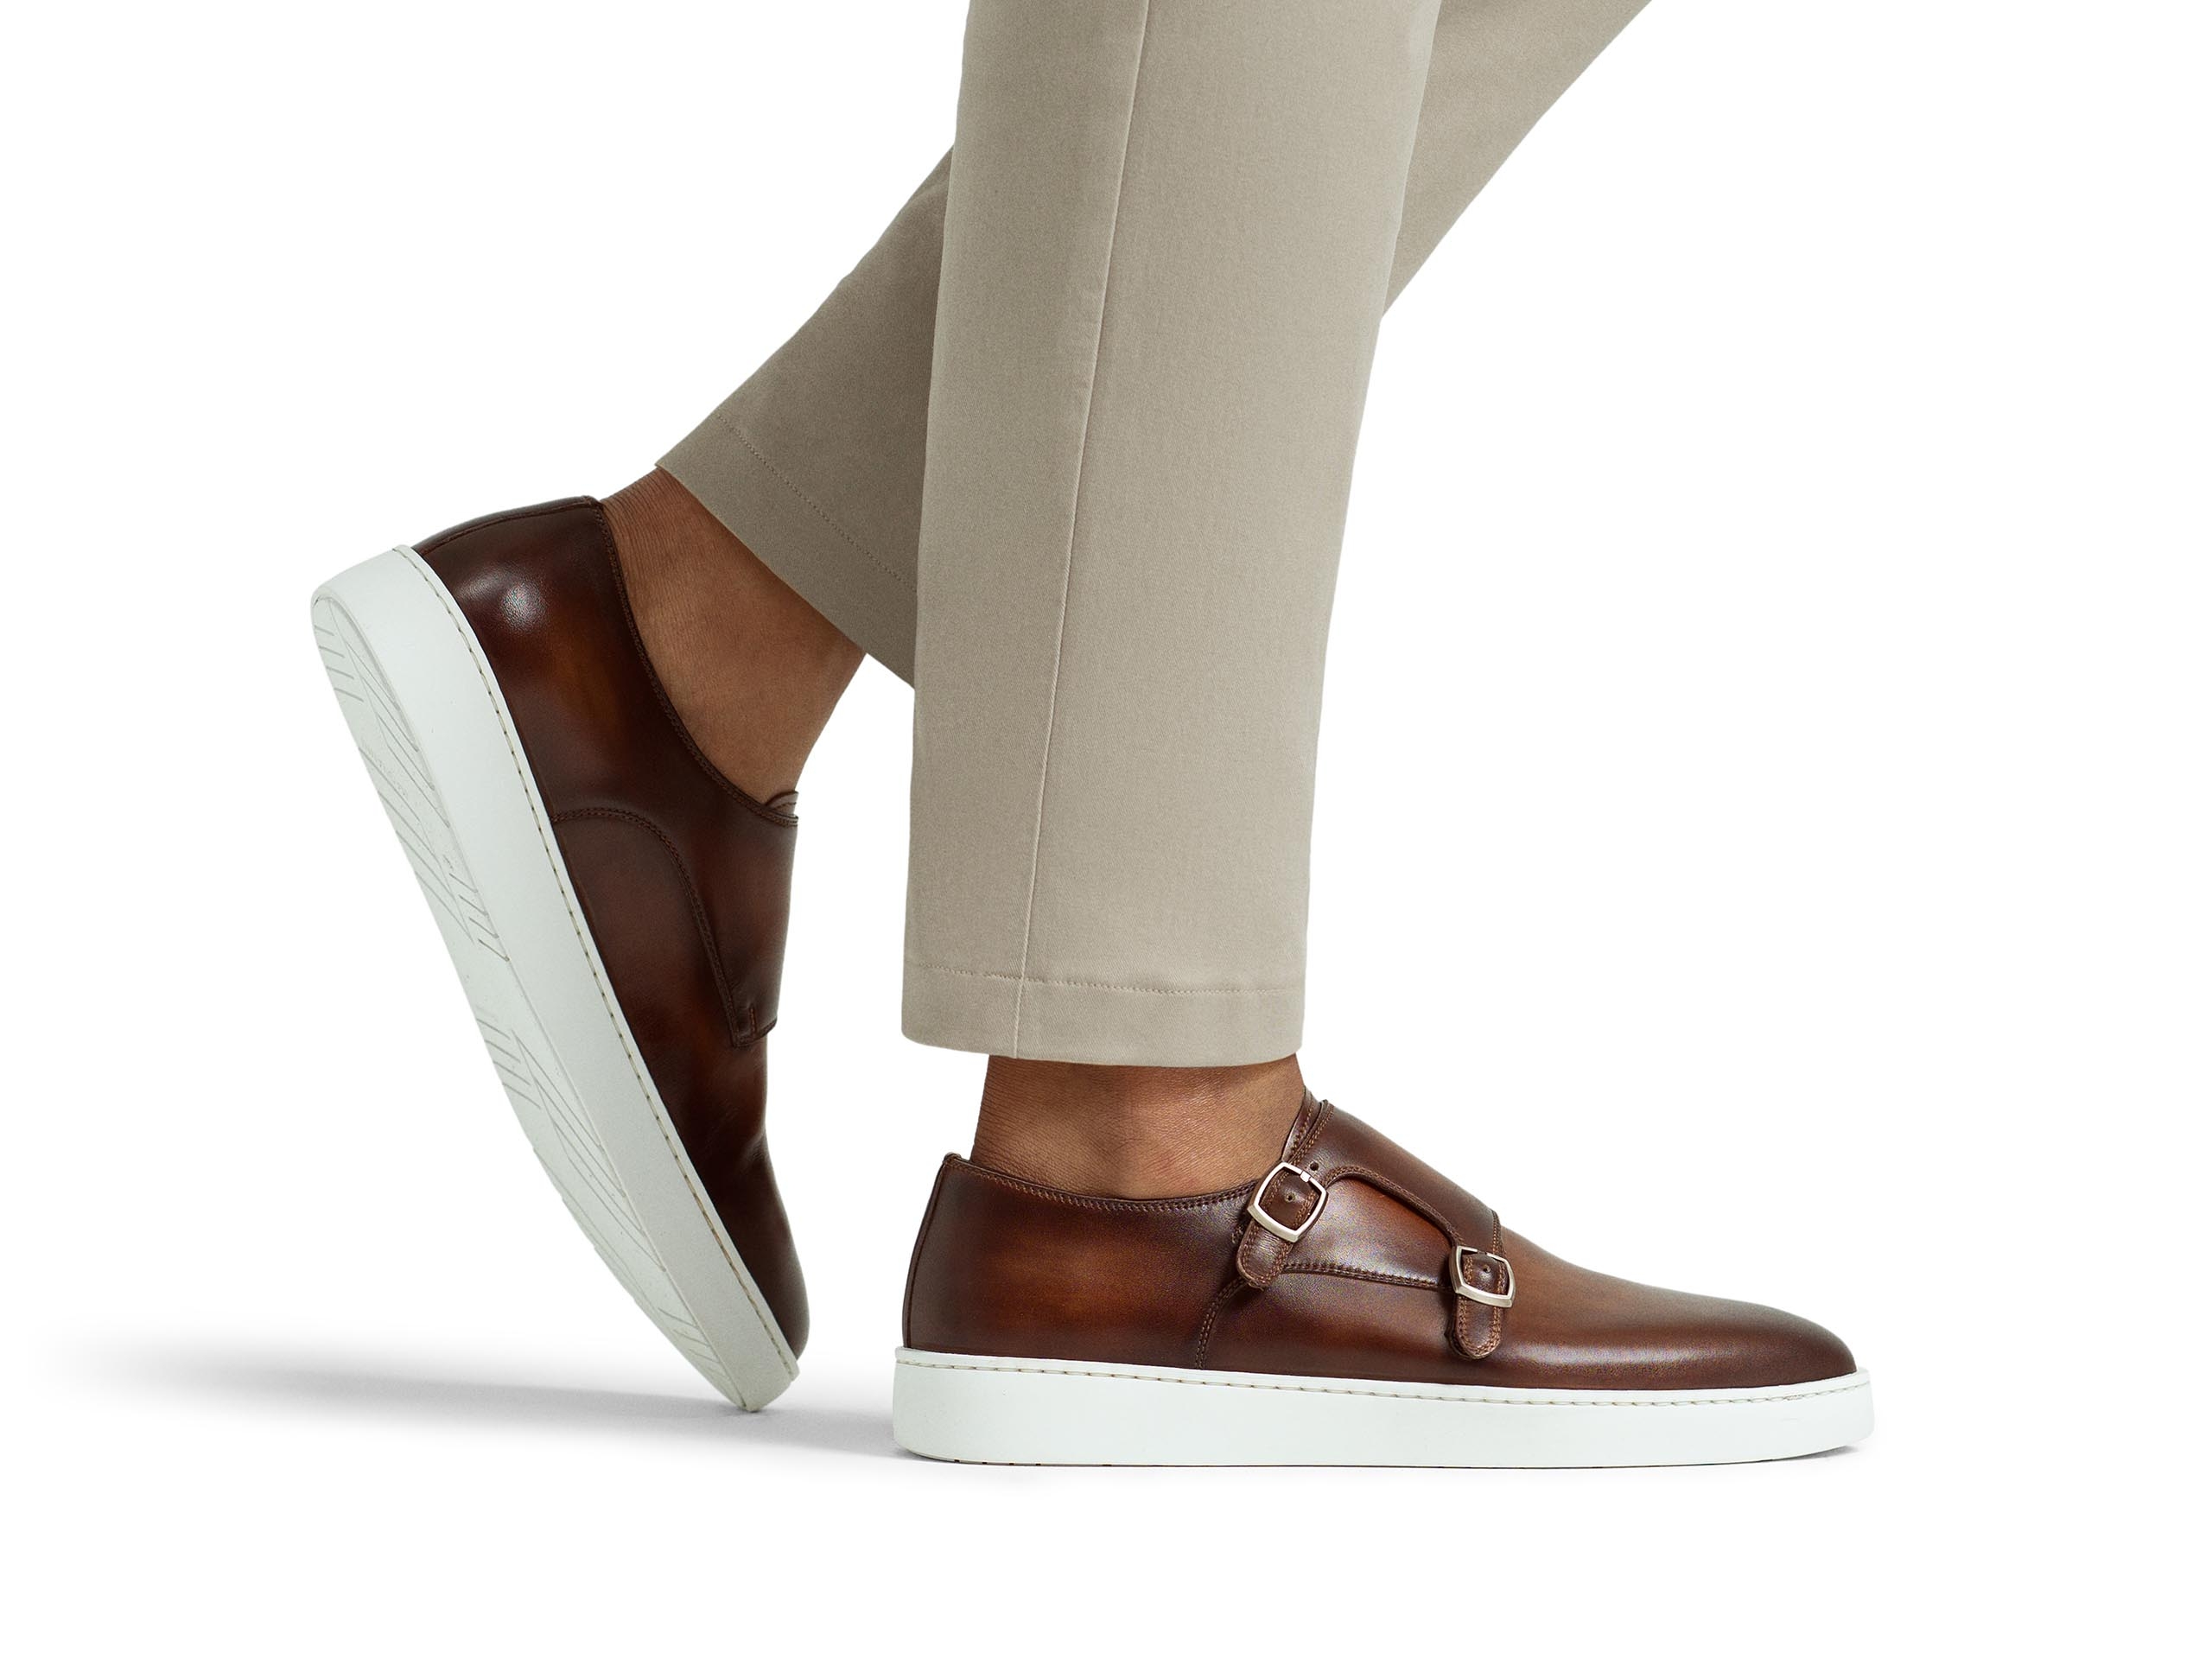 The Latham Midbrown pairs well with light grey dress pants